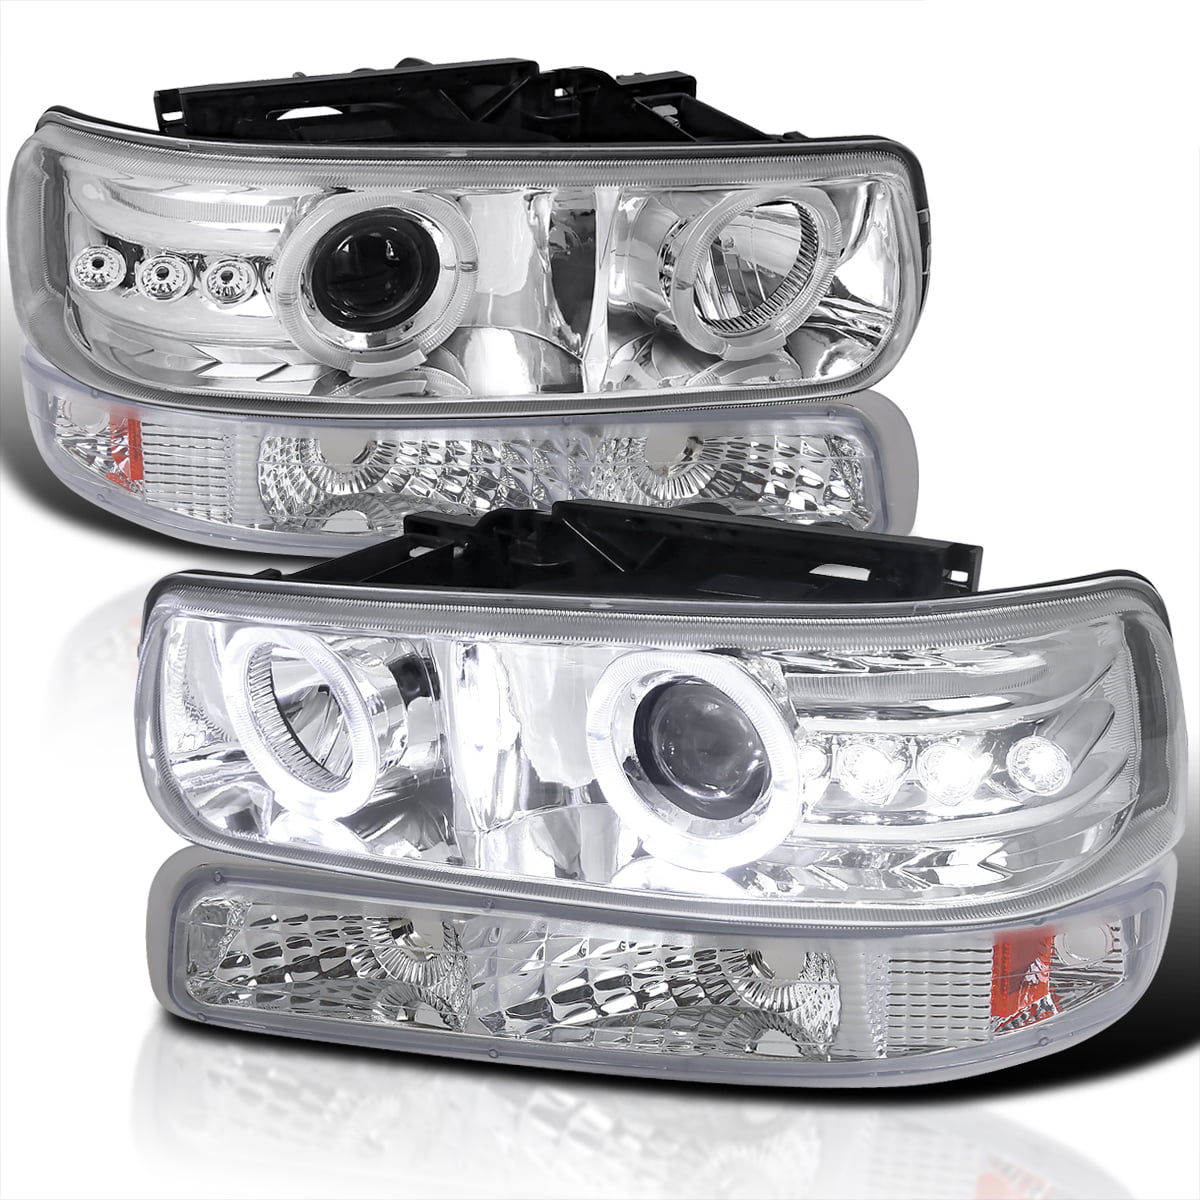 4Pcs Clear Chrome Housing Headlight Assembly Bumper Head Lamp Compatible with Chevy Silverado 1999-2002 Compatible with Chevrolet Tahoe /Chevrolet Suburban 